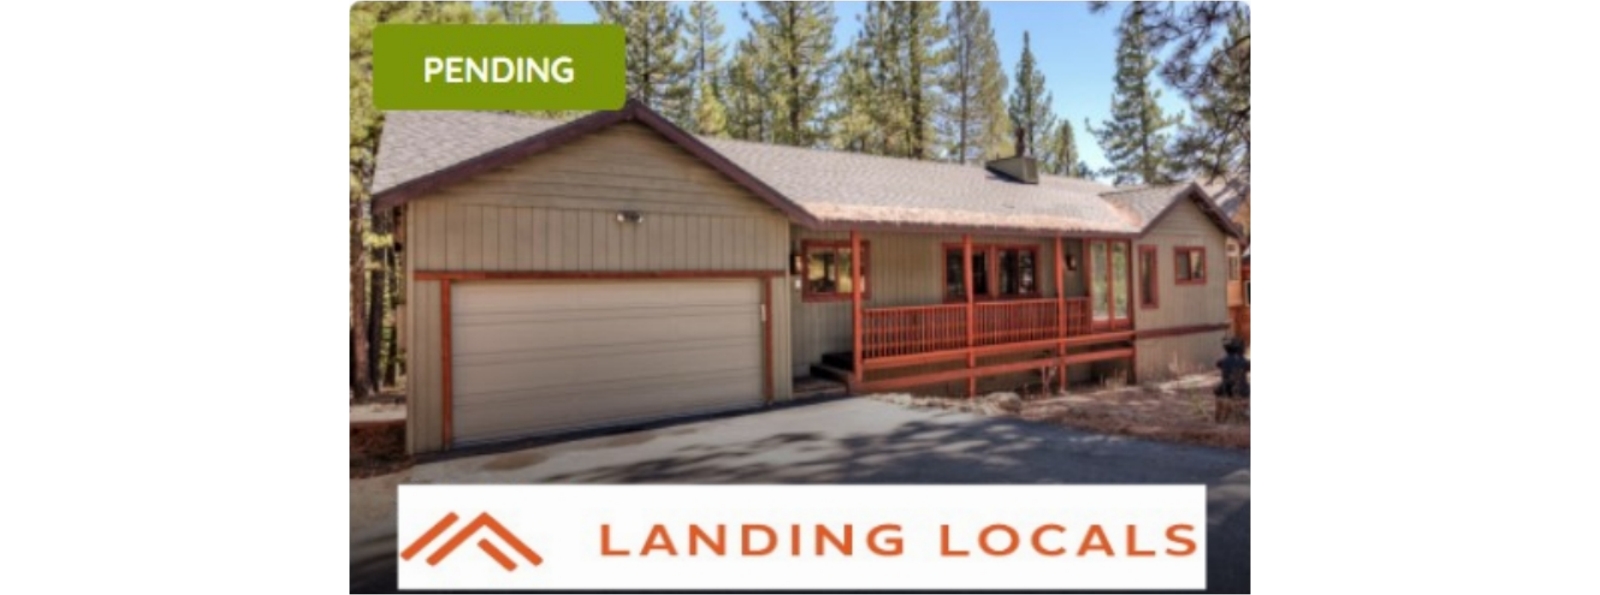 Town of Truckee Expands Innovative Program To Unlock Existing Housing Stock for Workforce Housing Needs